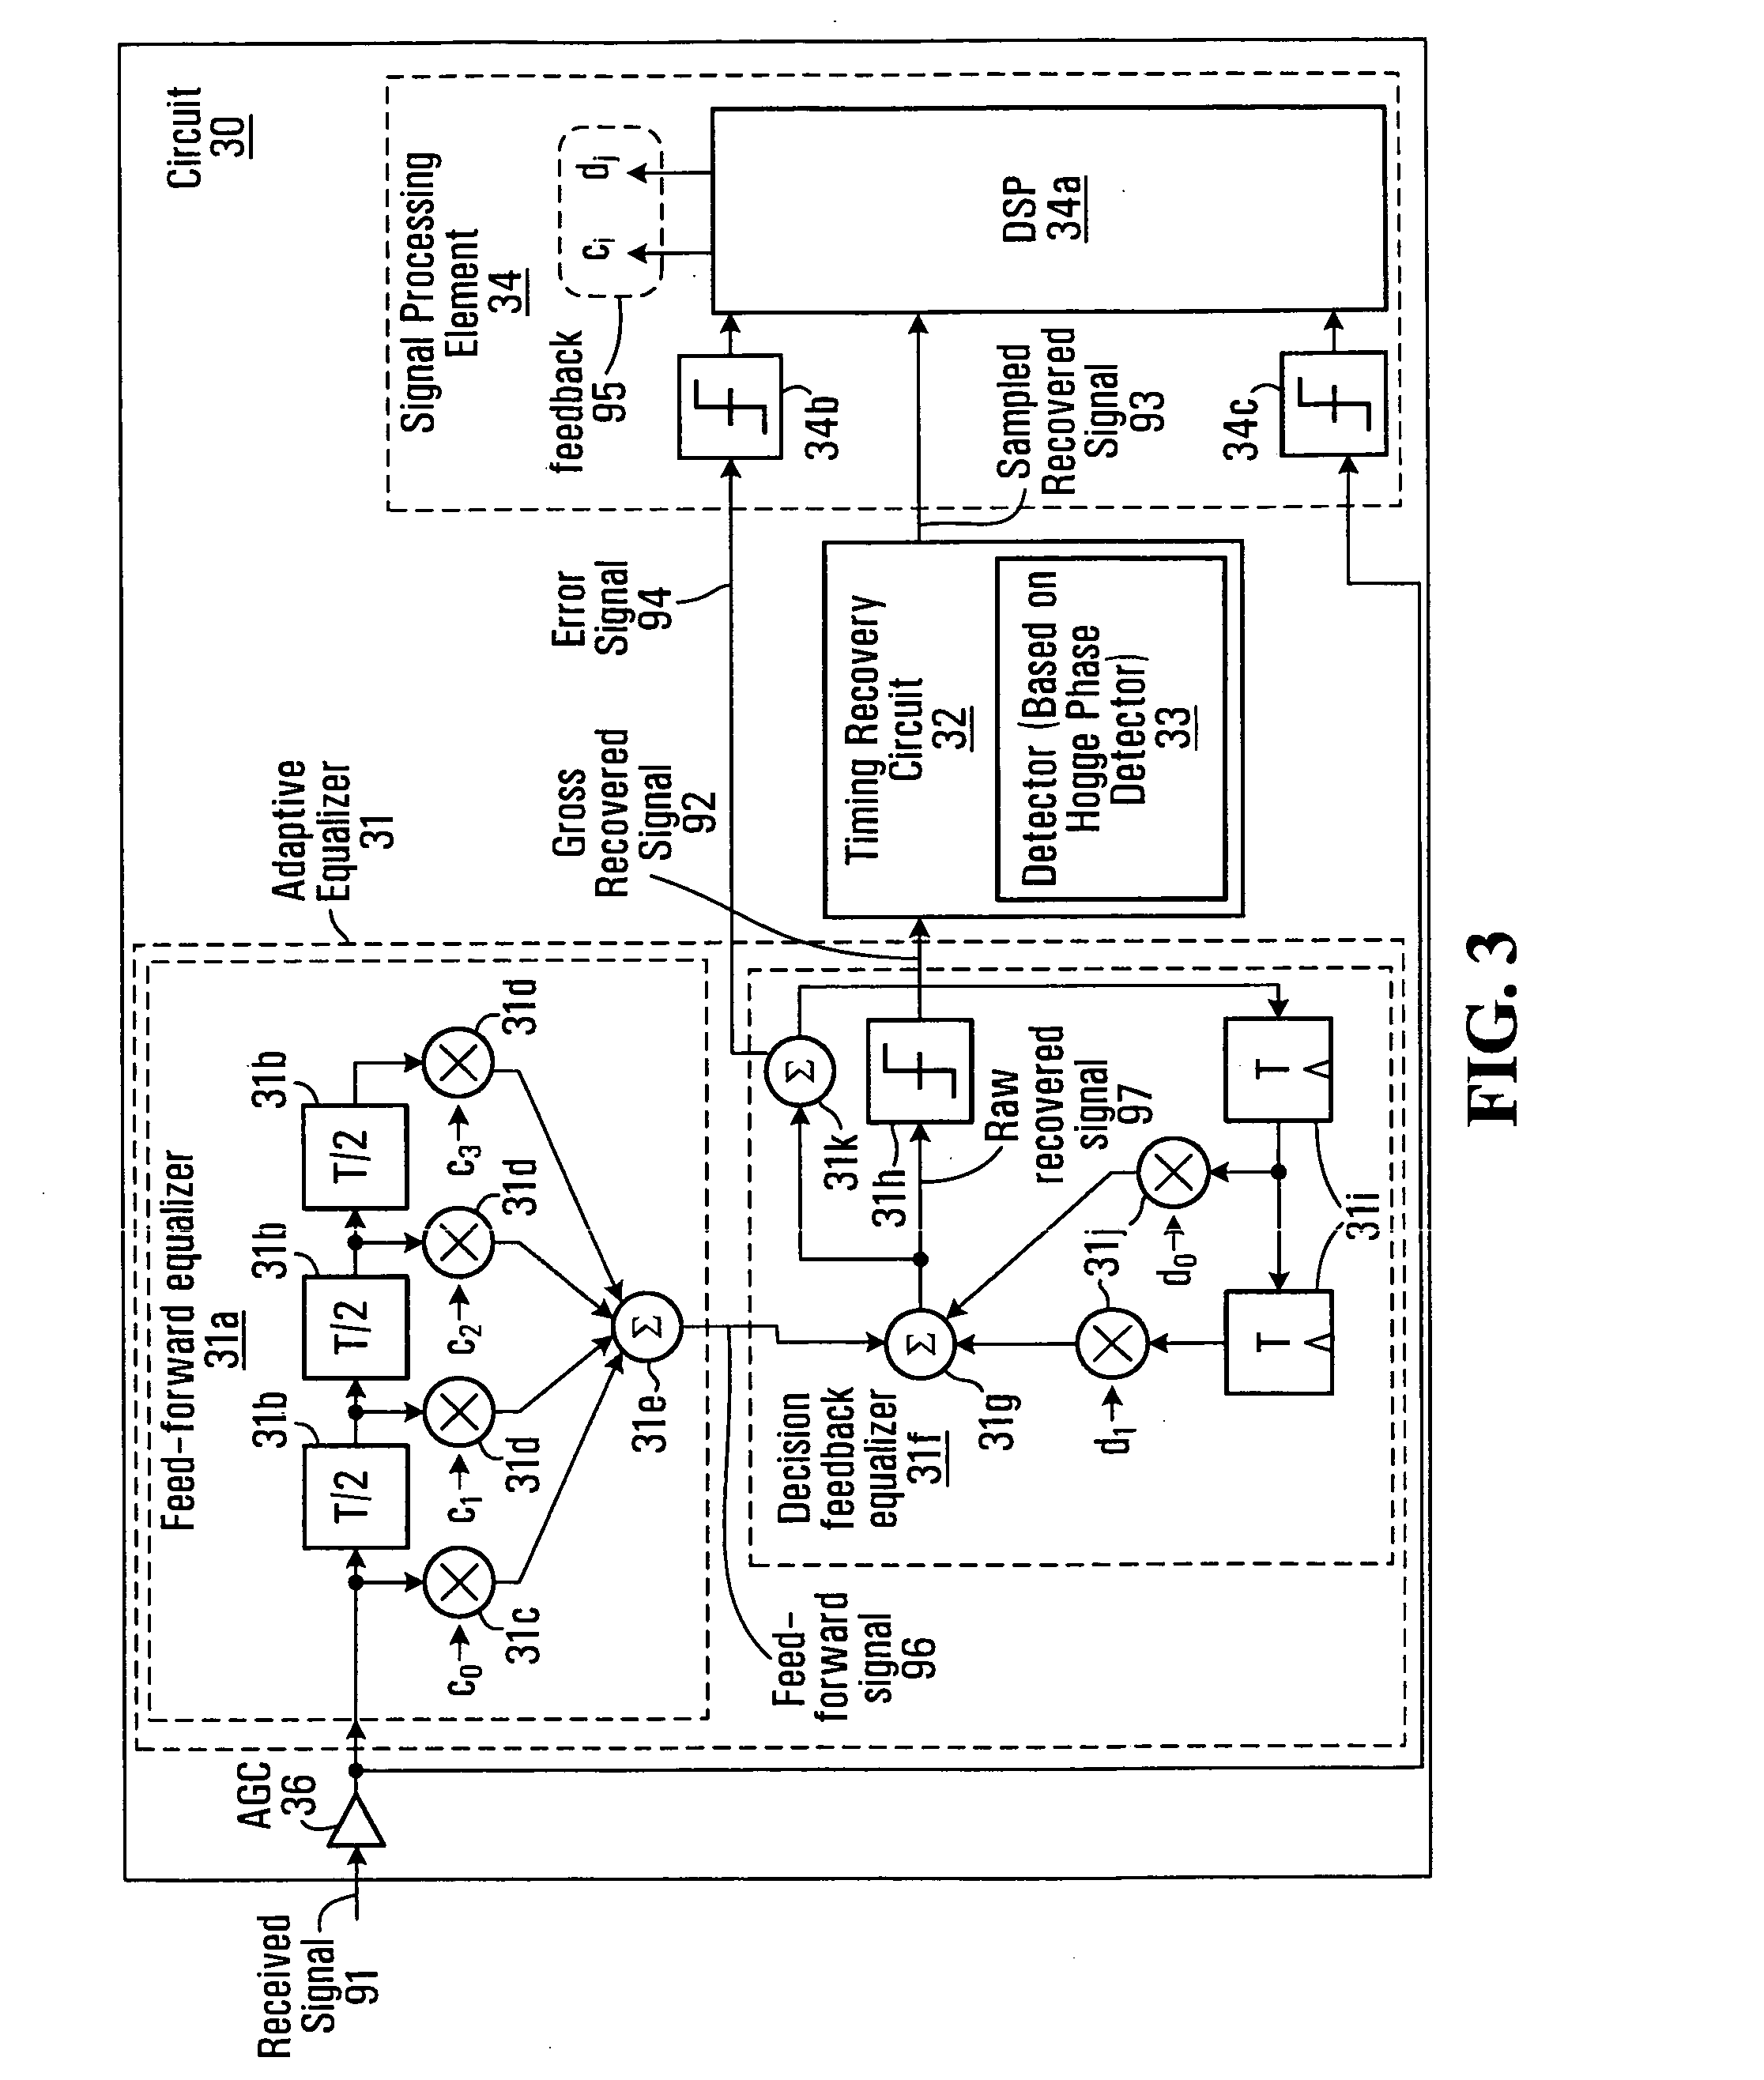 System and method for recovering data received over a communication channel